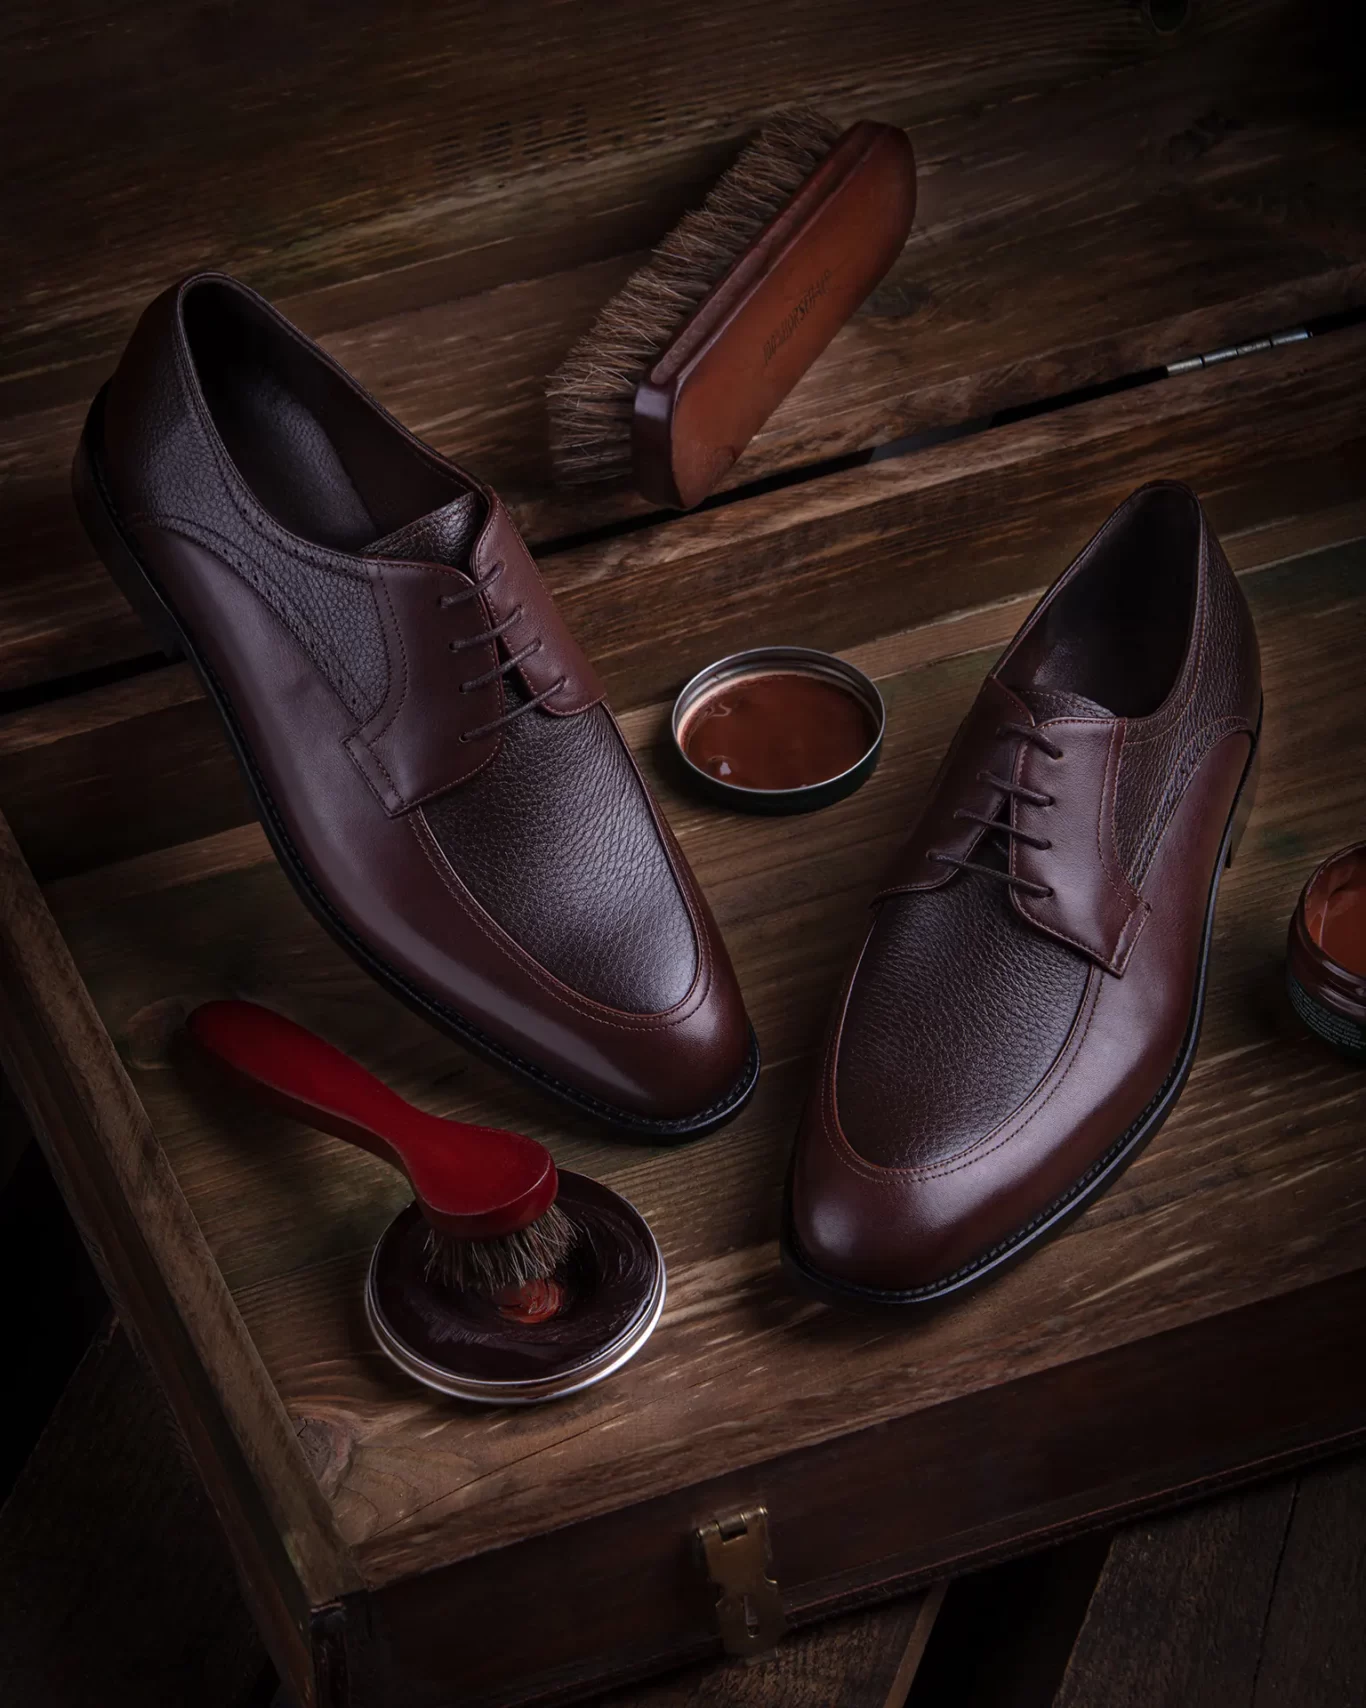 Leather Shoes Photography | Commercial Photography in Dubai